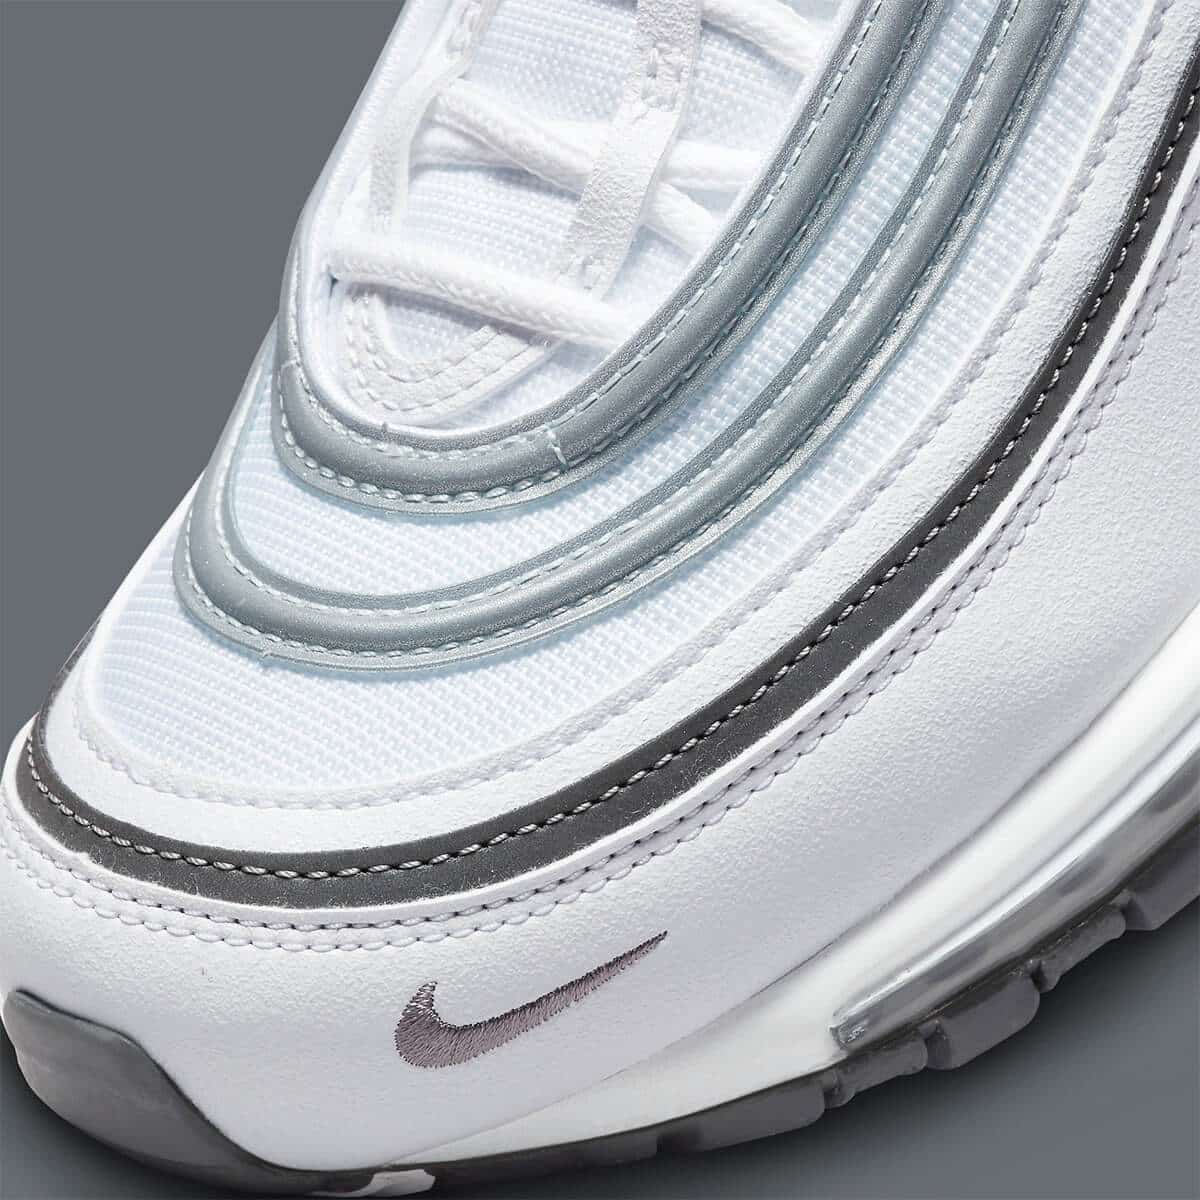 nike air max 97 white grey dx8970 100 release date 8